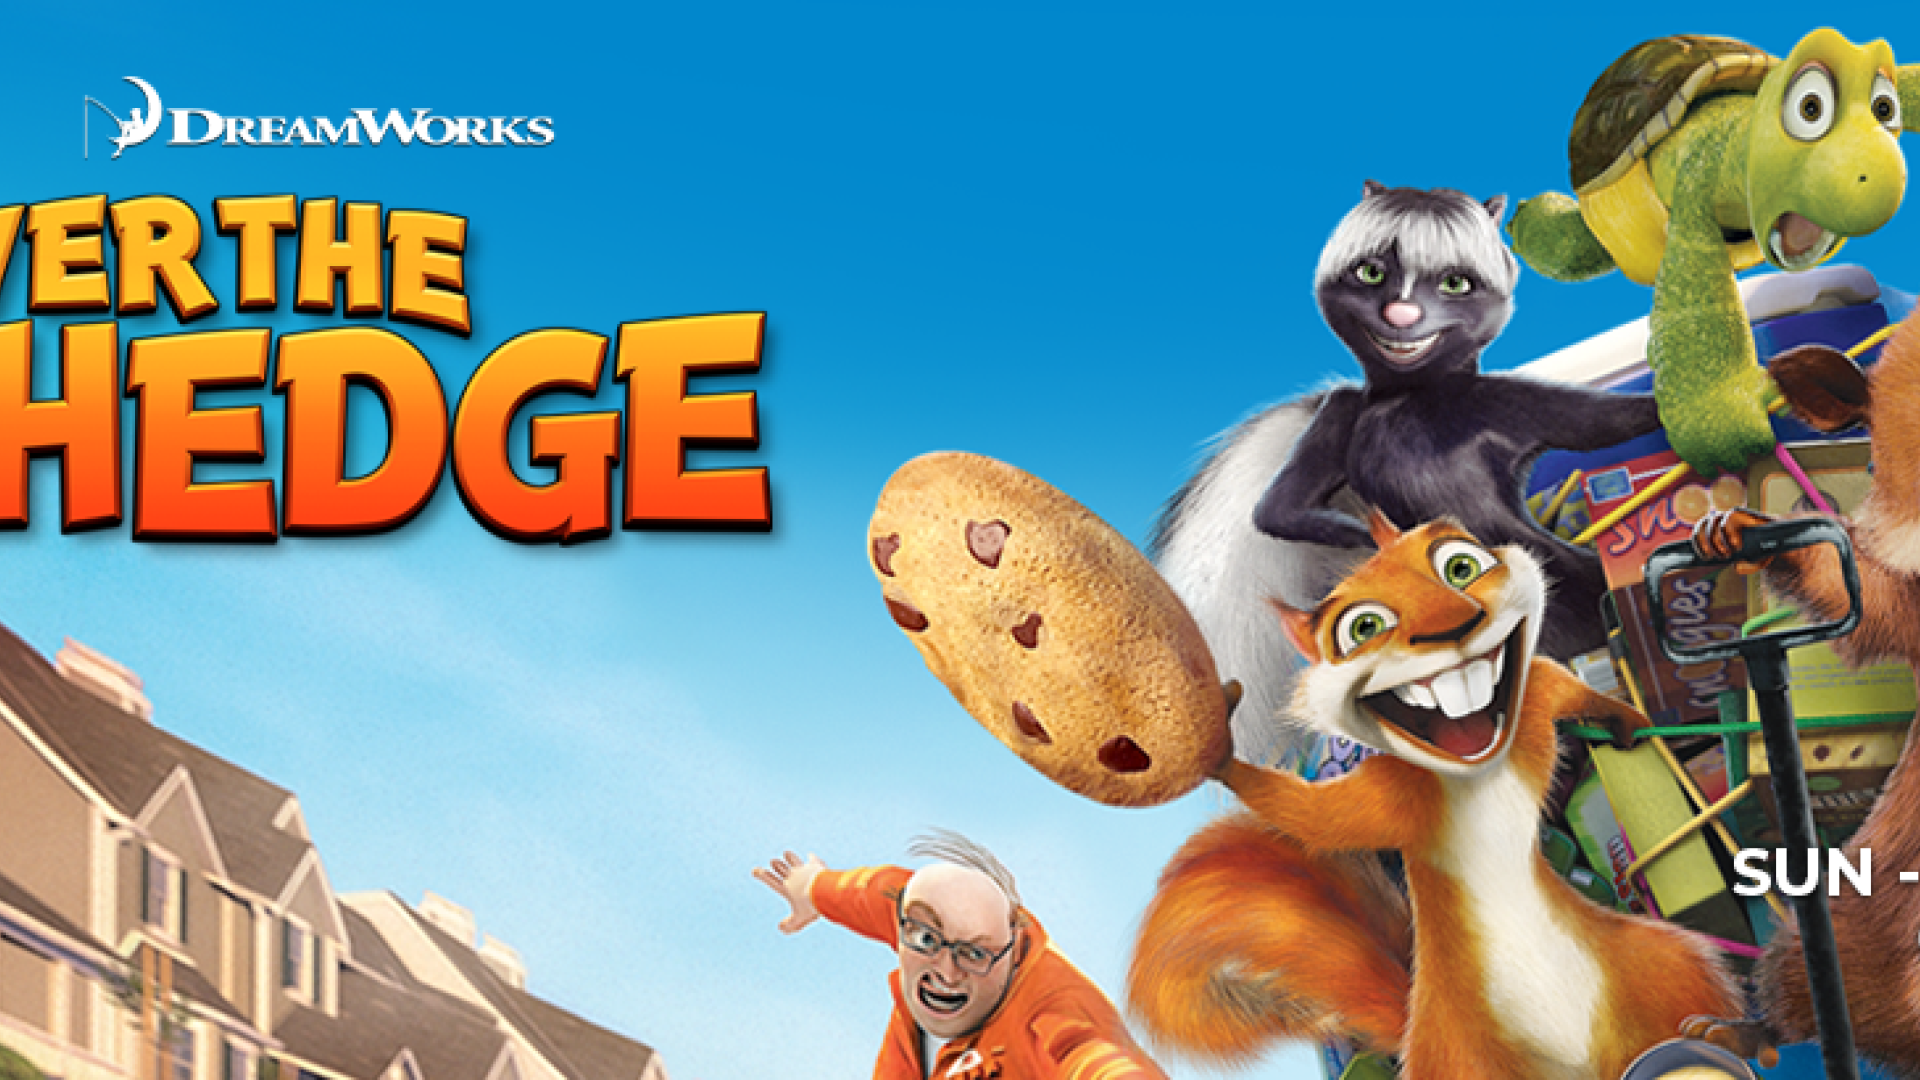 Over The Hedge 